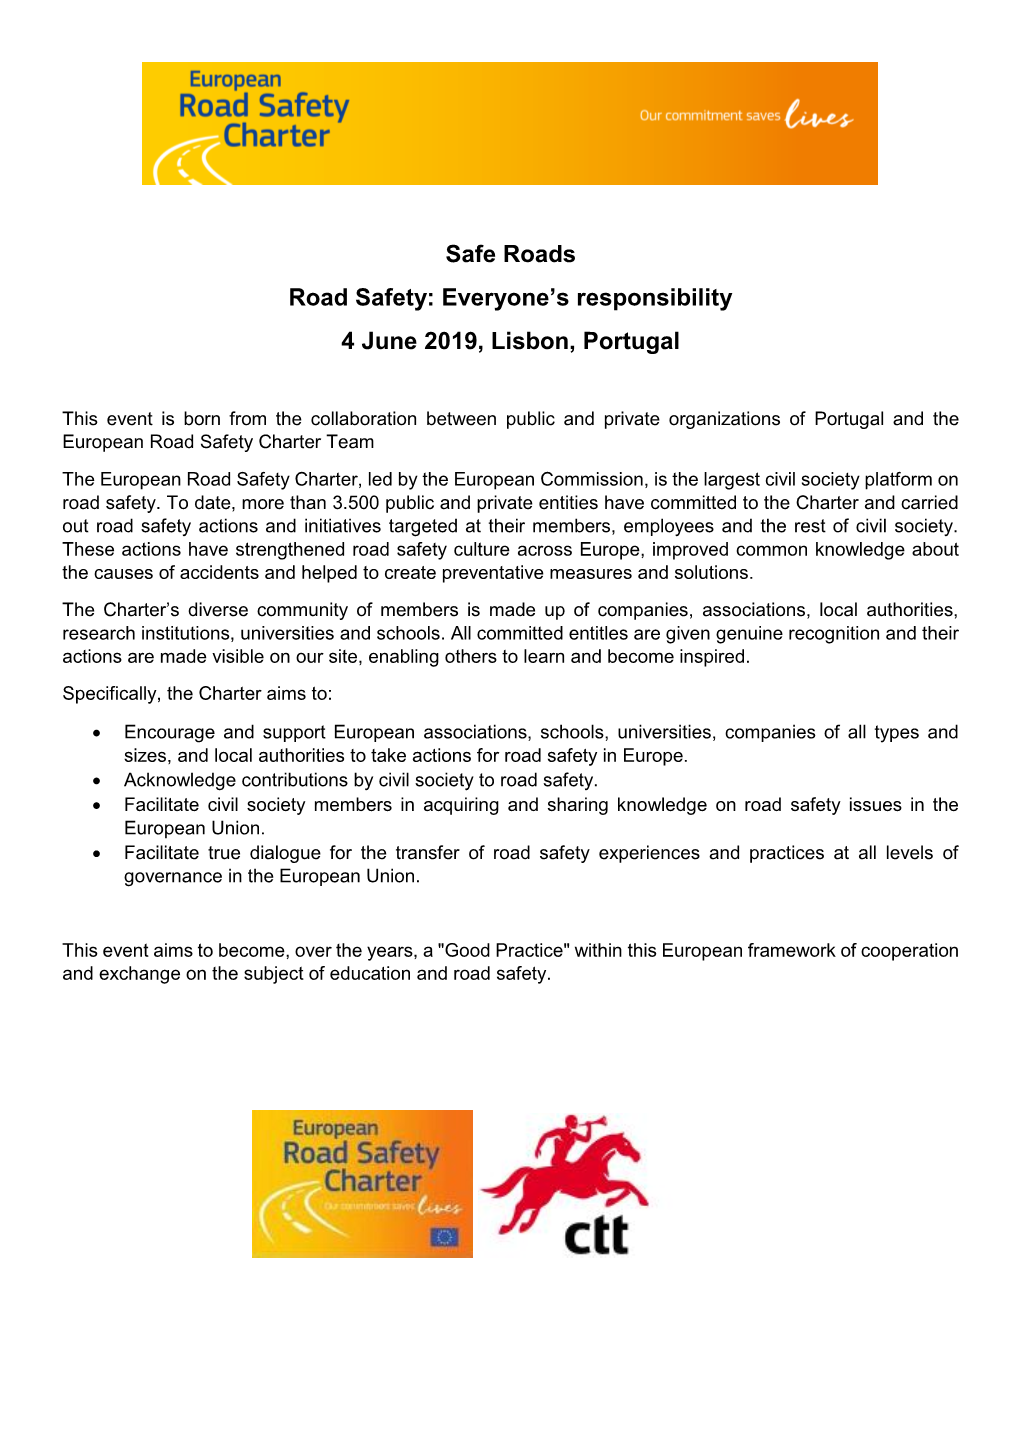 Safe Roads Road Safety: Everyone's Responsibility 4 June 2019, Lisbon, Portugal